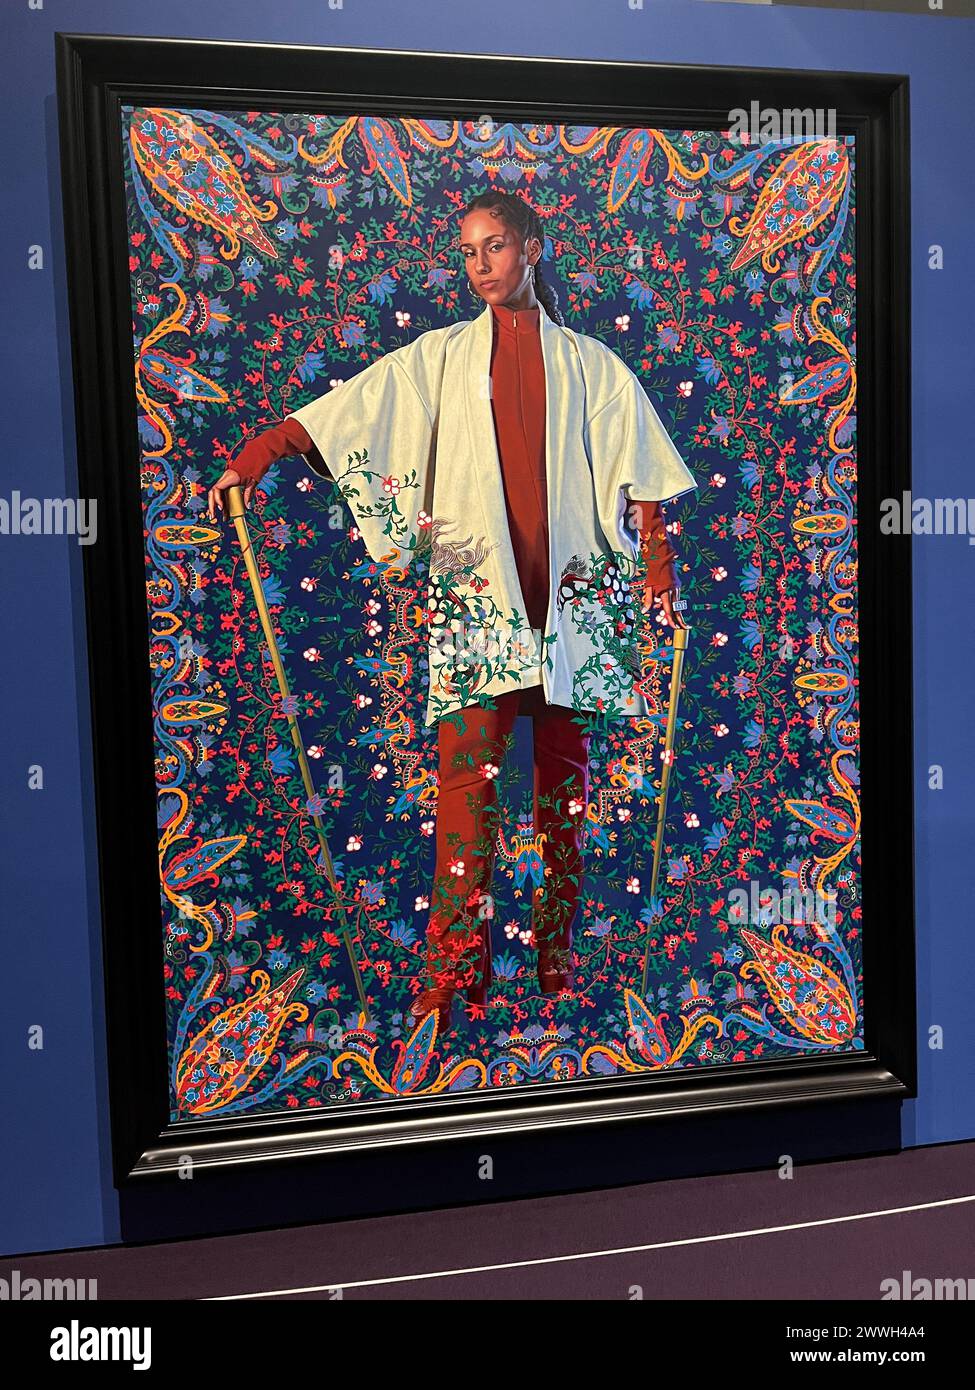 Alicia Keys Dean by Kehinde Wiley. Giants exhibition at the Brooklyn Museum; Art from the Dean Collection of Swizz Beatz and Alicia Keys Stock Photo